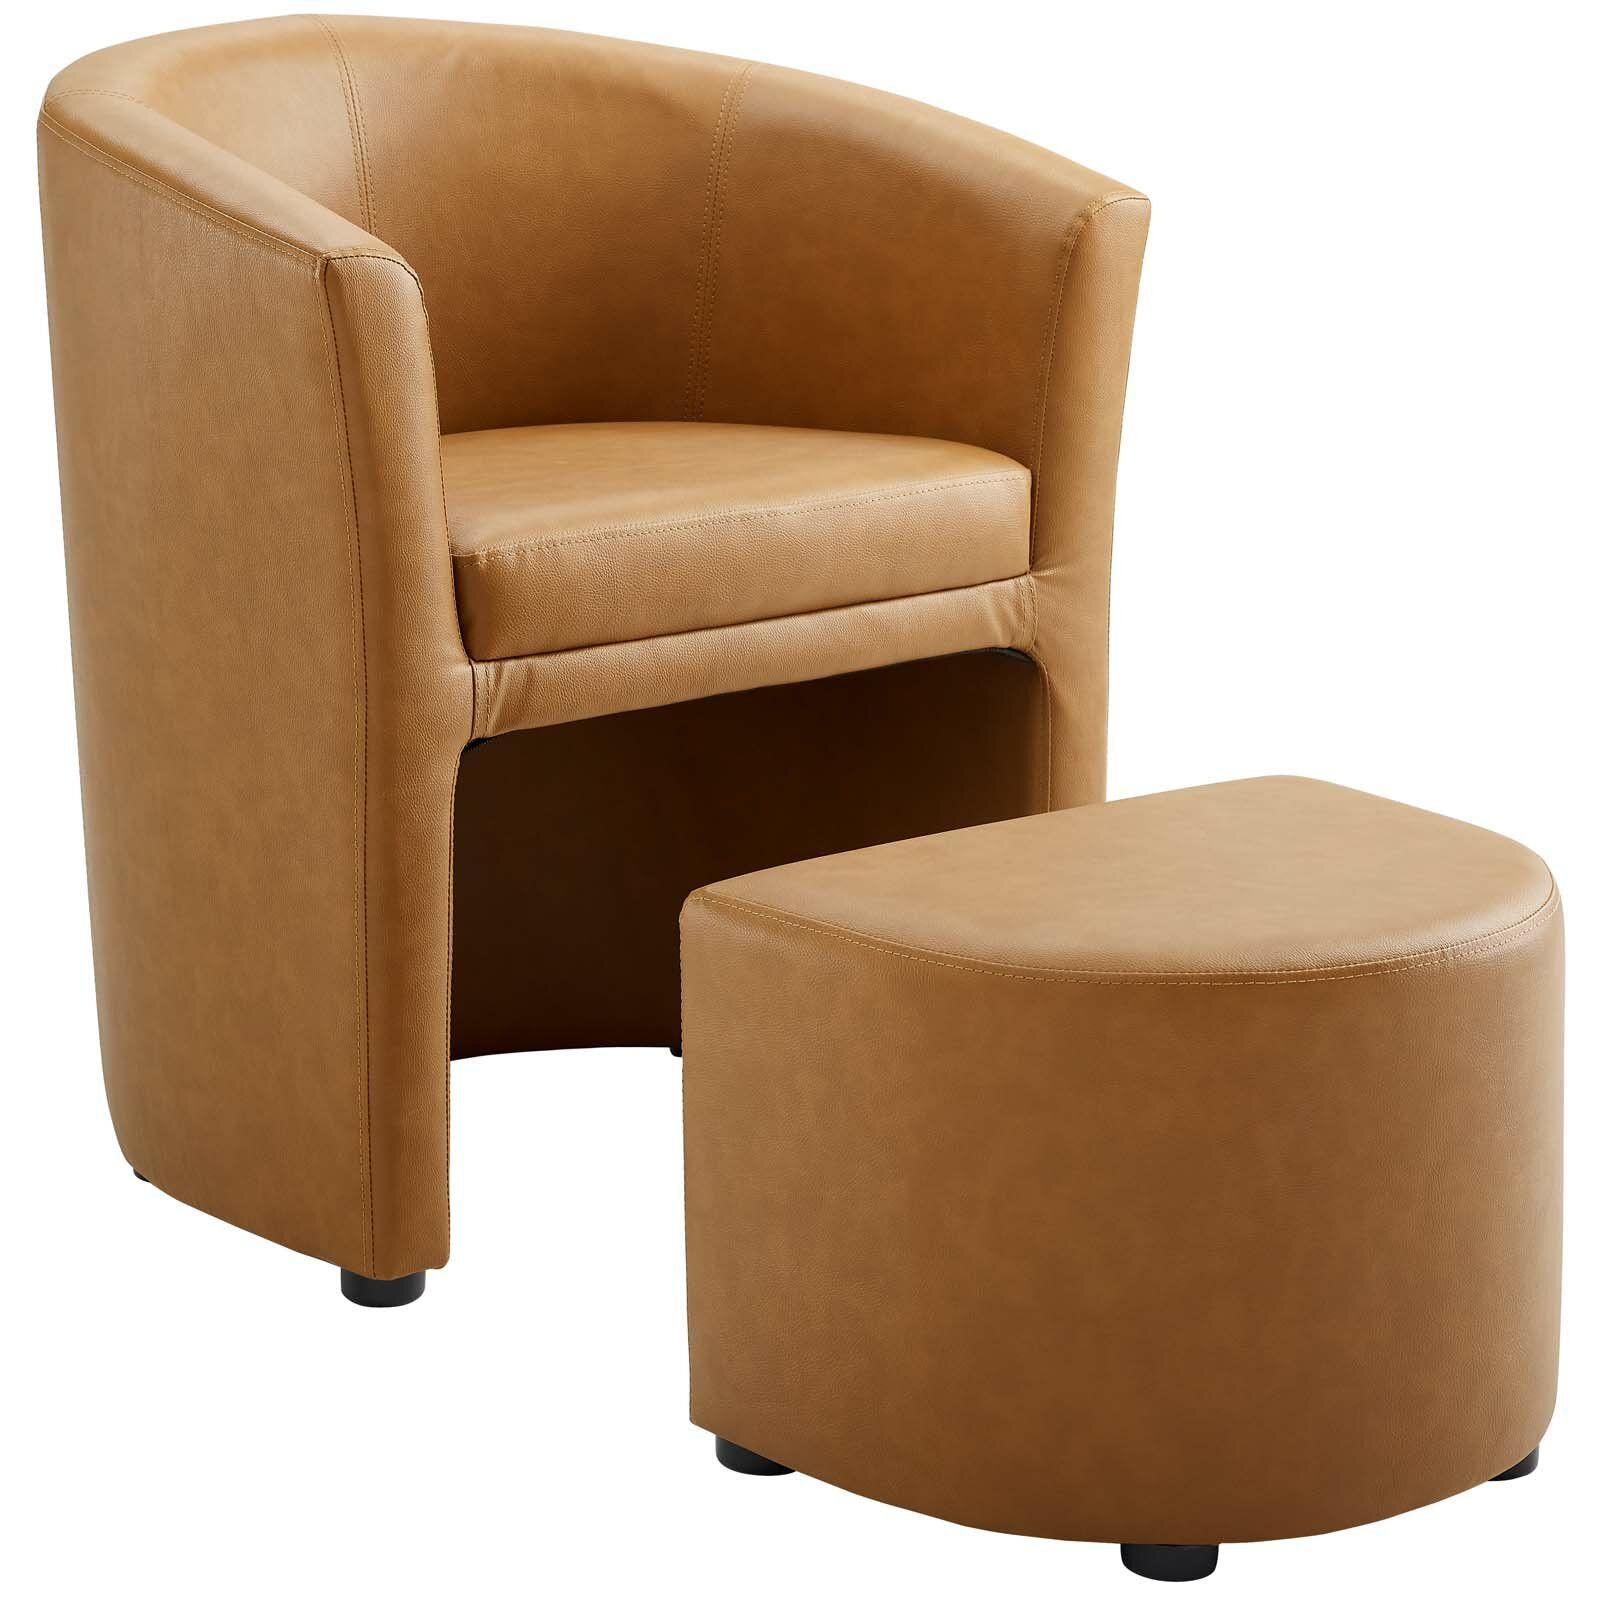 Darvin 28" W Faux Leather Barrel Chair And Ottoman Inside Faux Leather Barrel Chair And Ottoman Sets (View 8 of 15)